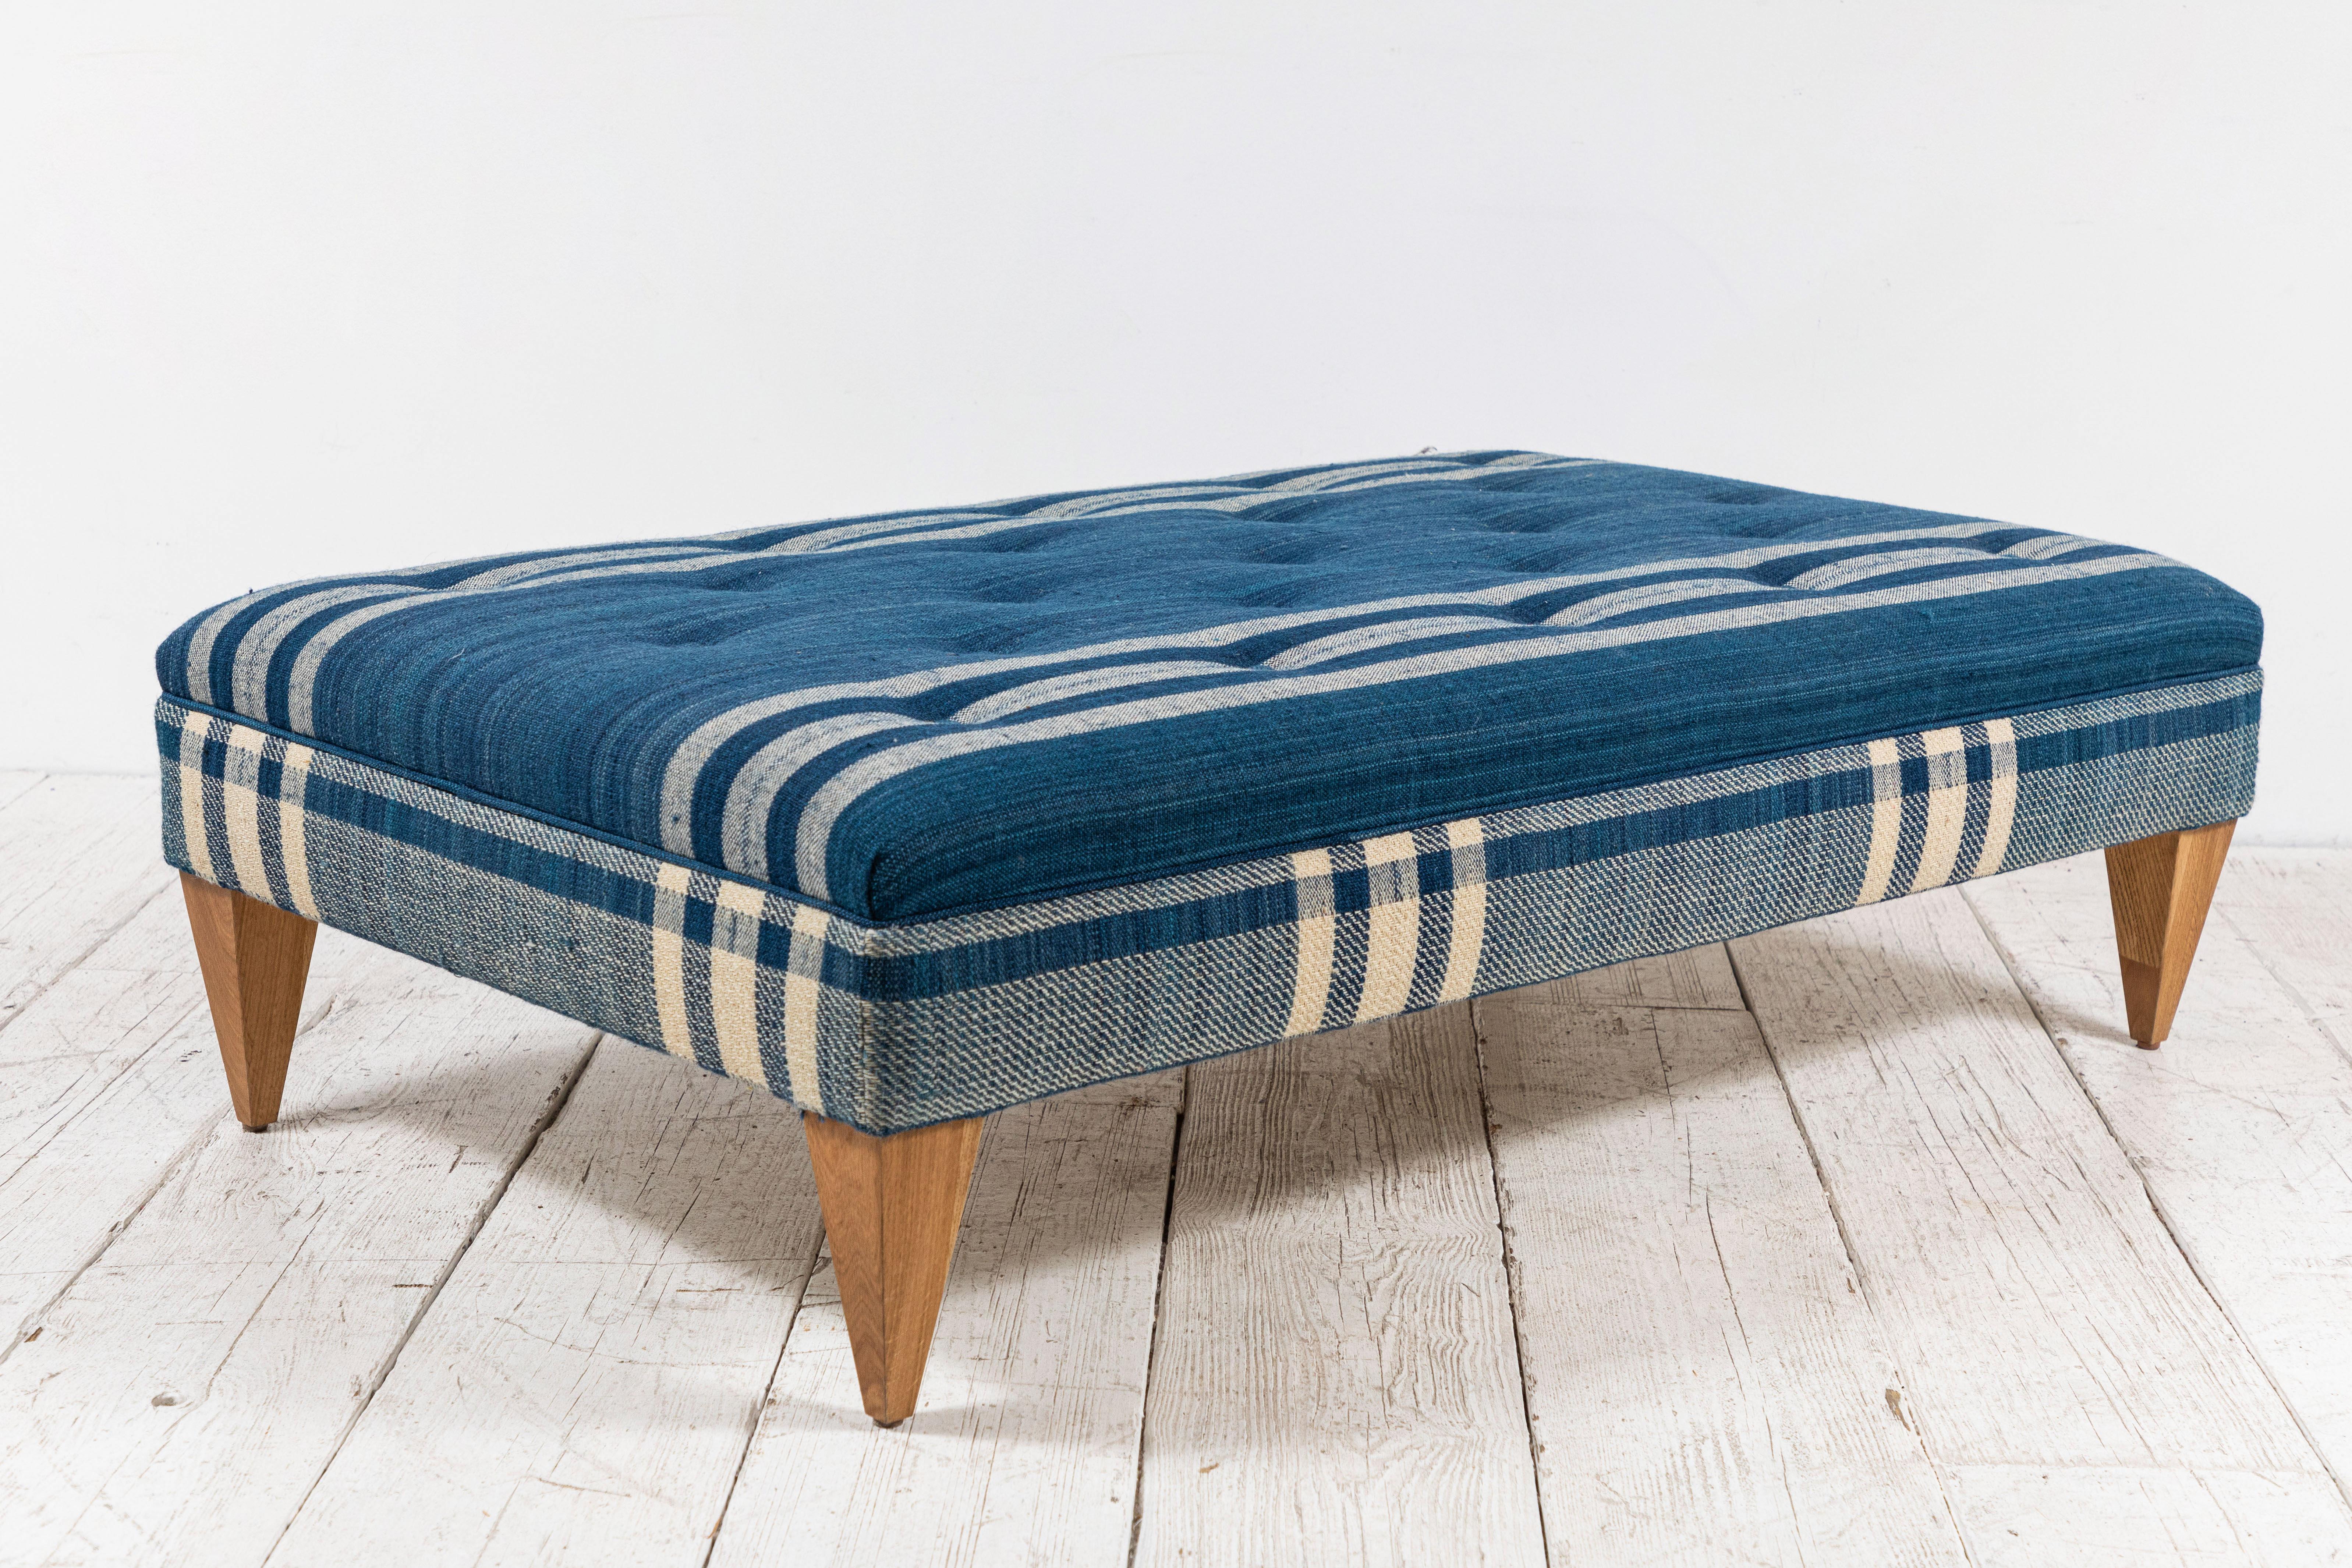 Nickey Kehoe collection tufted ottoman in blue plaid wool by Susan Deliss.
 